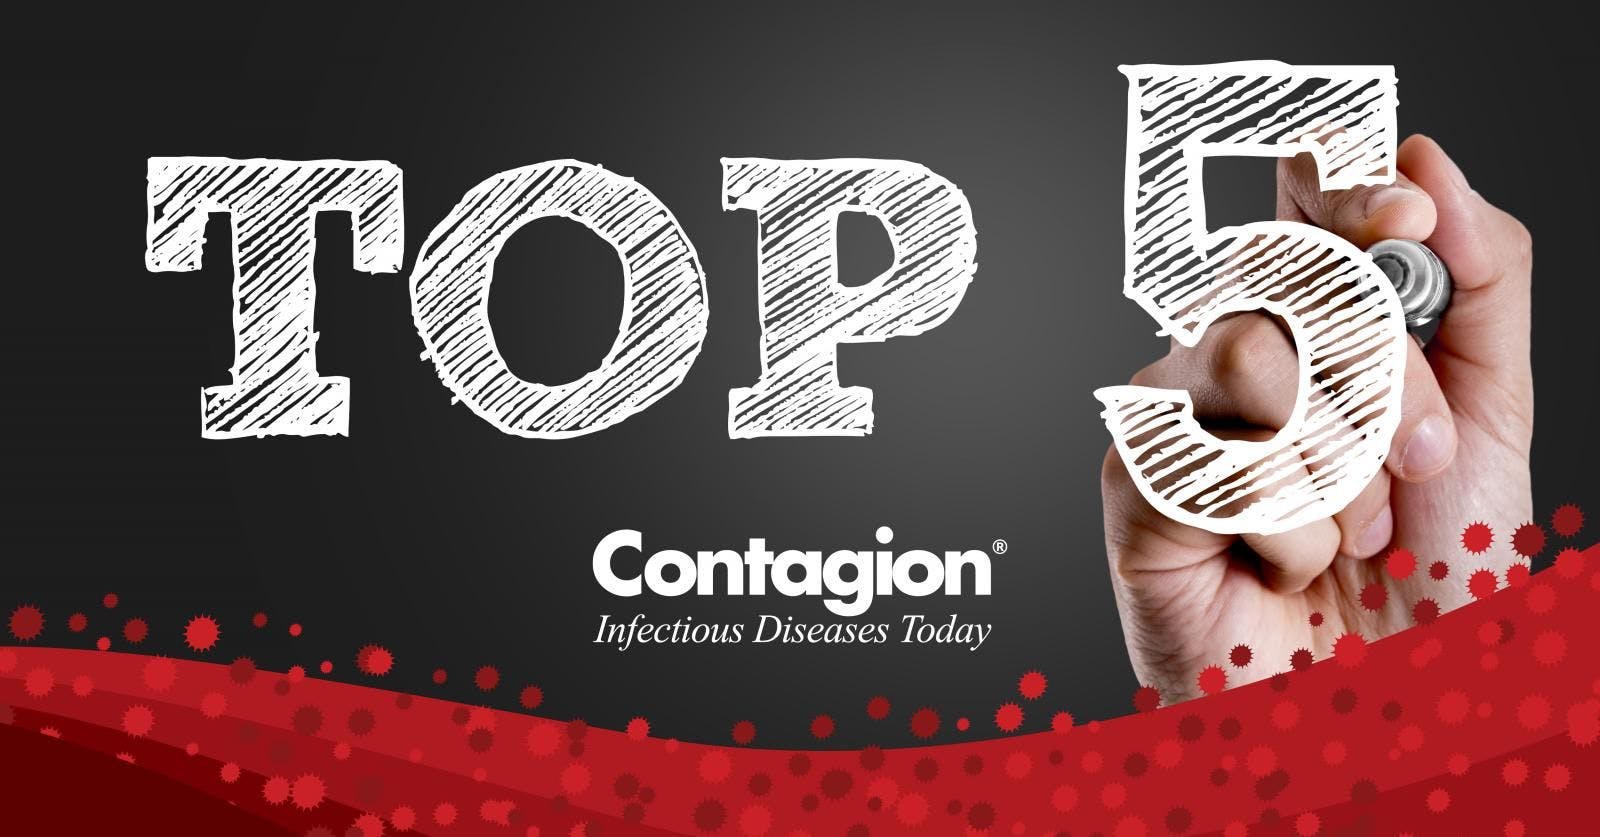 Top Infectious Disease News of the Week&mdash;March 29, 2020